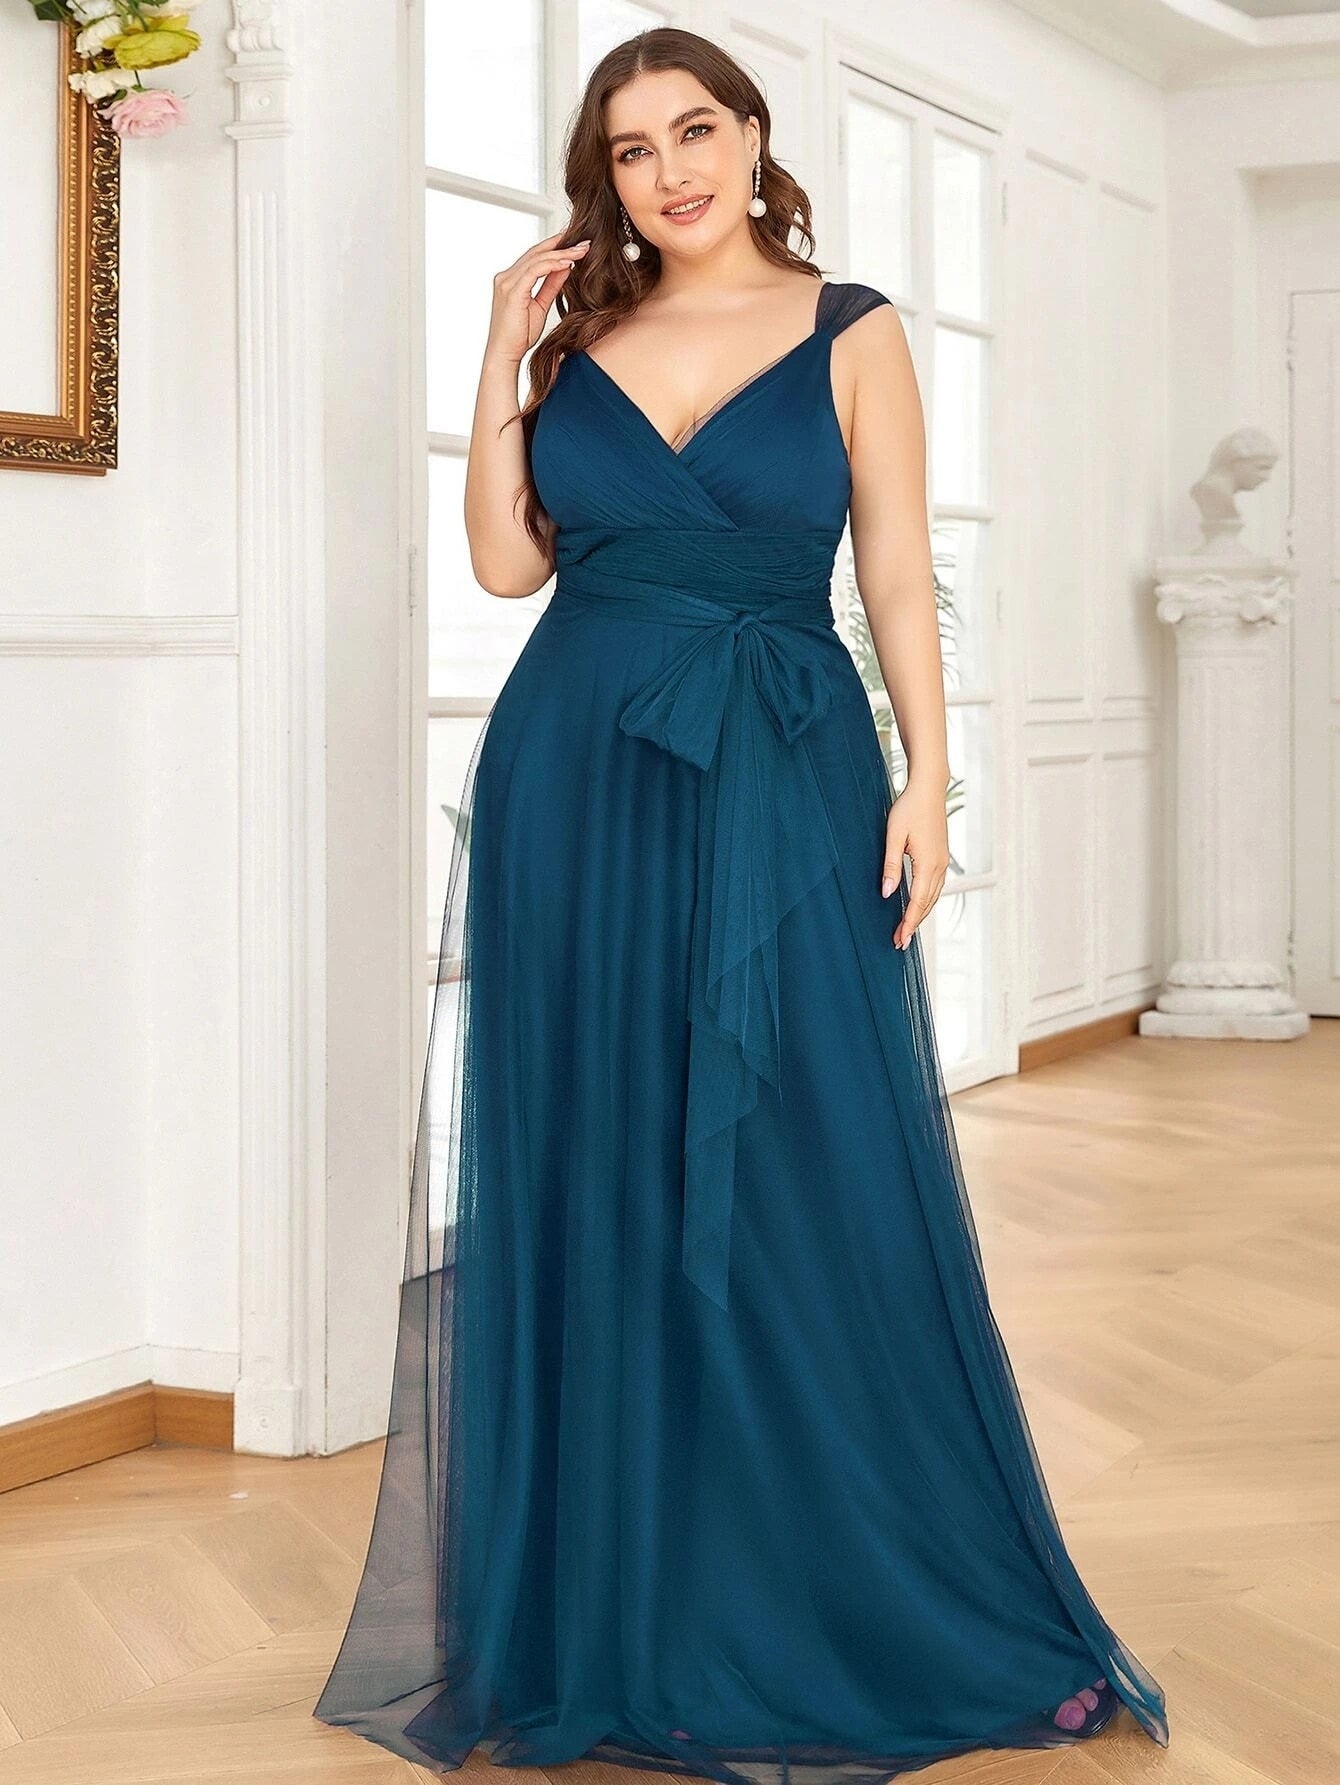 Plus Size Luxury Evening Dresse Long V-Neck Sleeveless A-LINE Floor-Length Gown 2023 BAZIIINGAAA  of Solid Lace Prom Women Dress